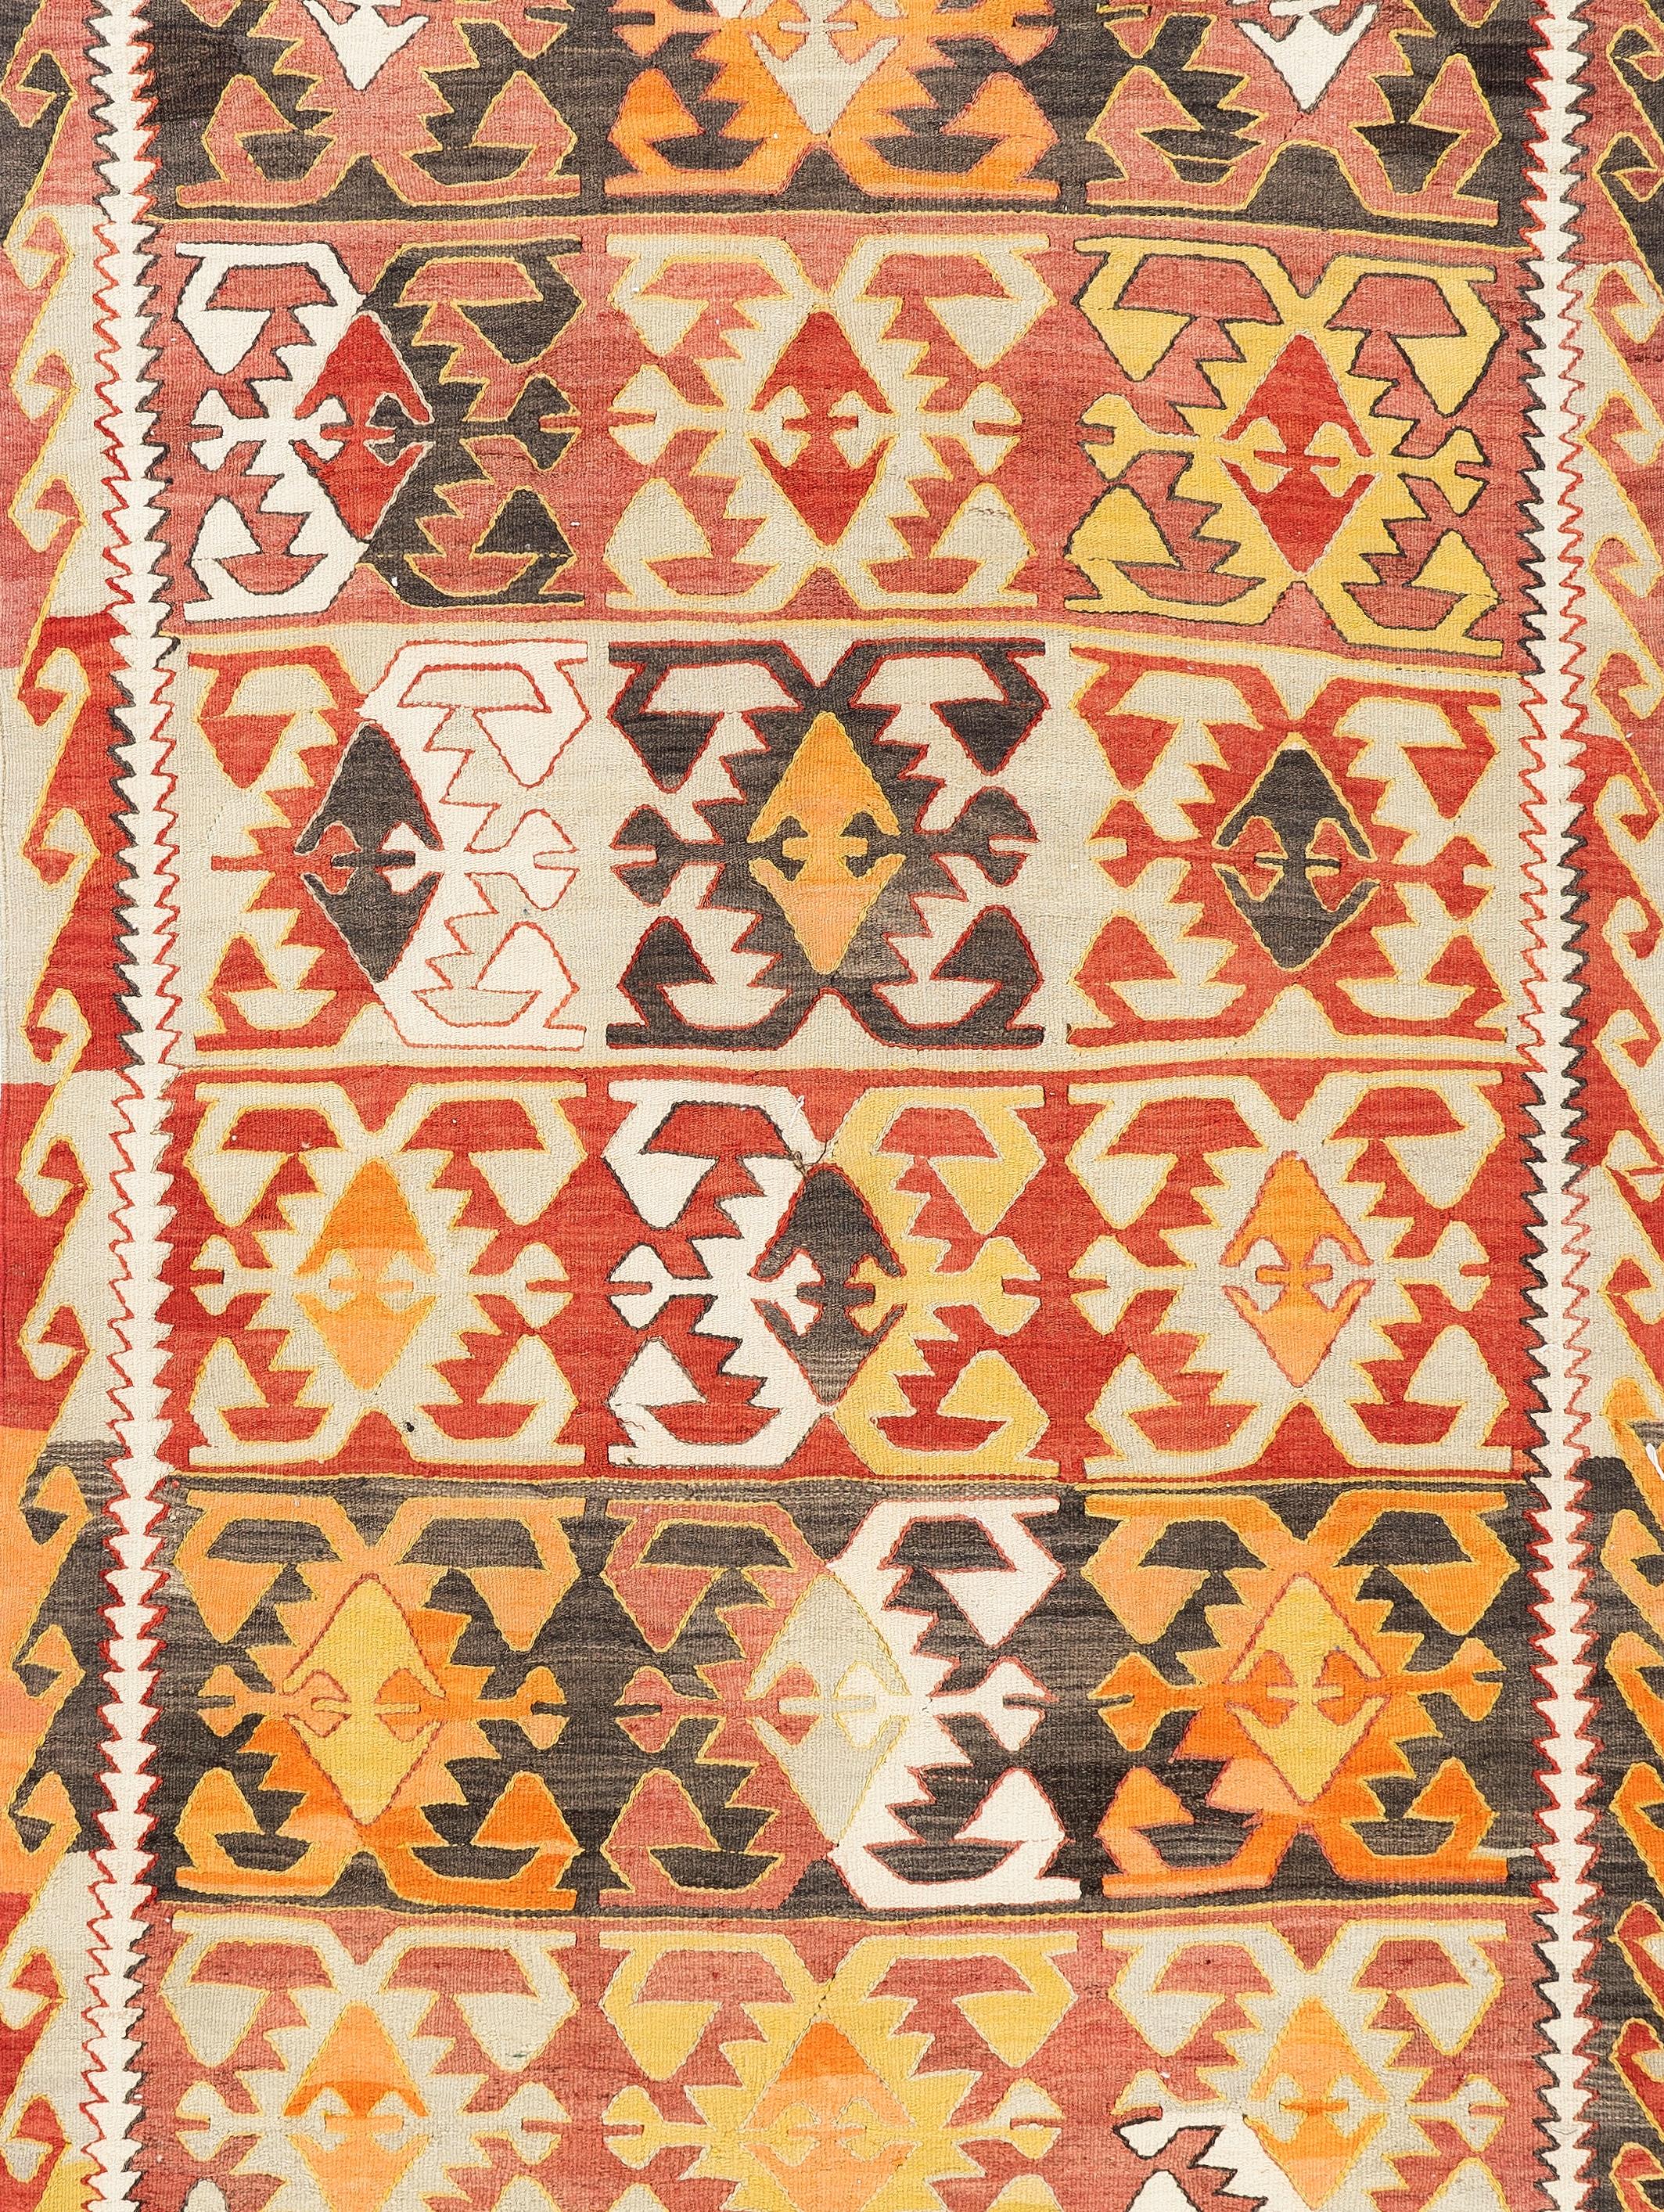 Hand-Woven 5x10 Ft Vintage Anatolian Kilim with Rustic Colors, Flat-Weave Rug. 100% Wool